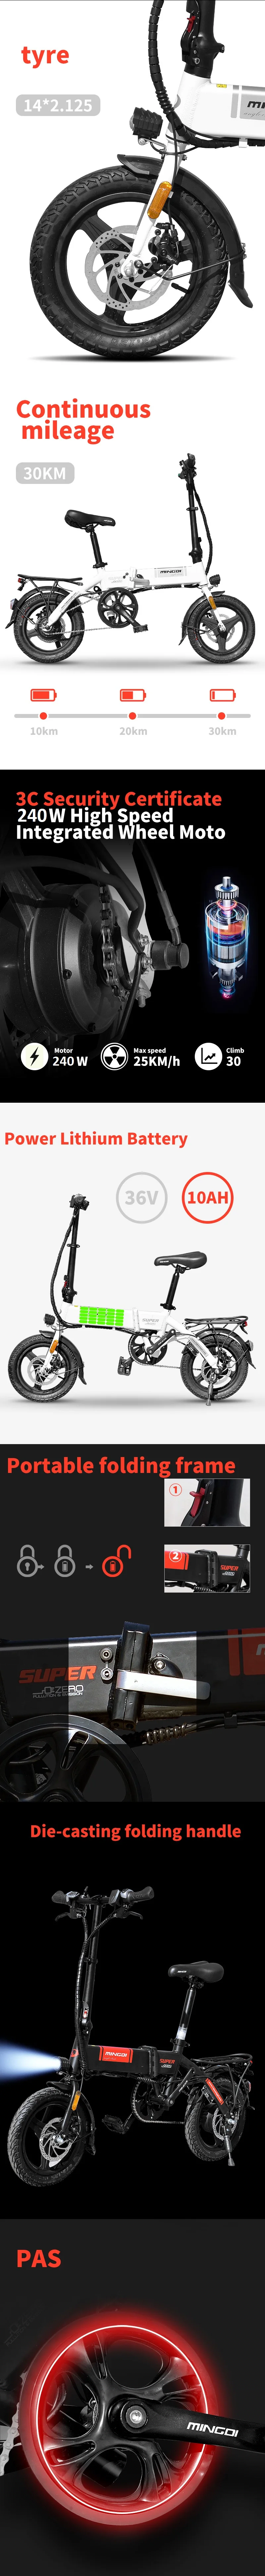 M2 14-inch Portable folding electric bicycle 36V 10AH E-bike 240W motor Lithium Battery City Leisure Electric Bicycle 25km/h